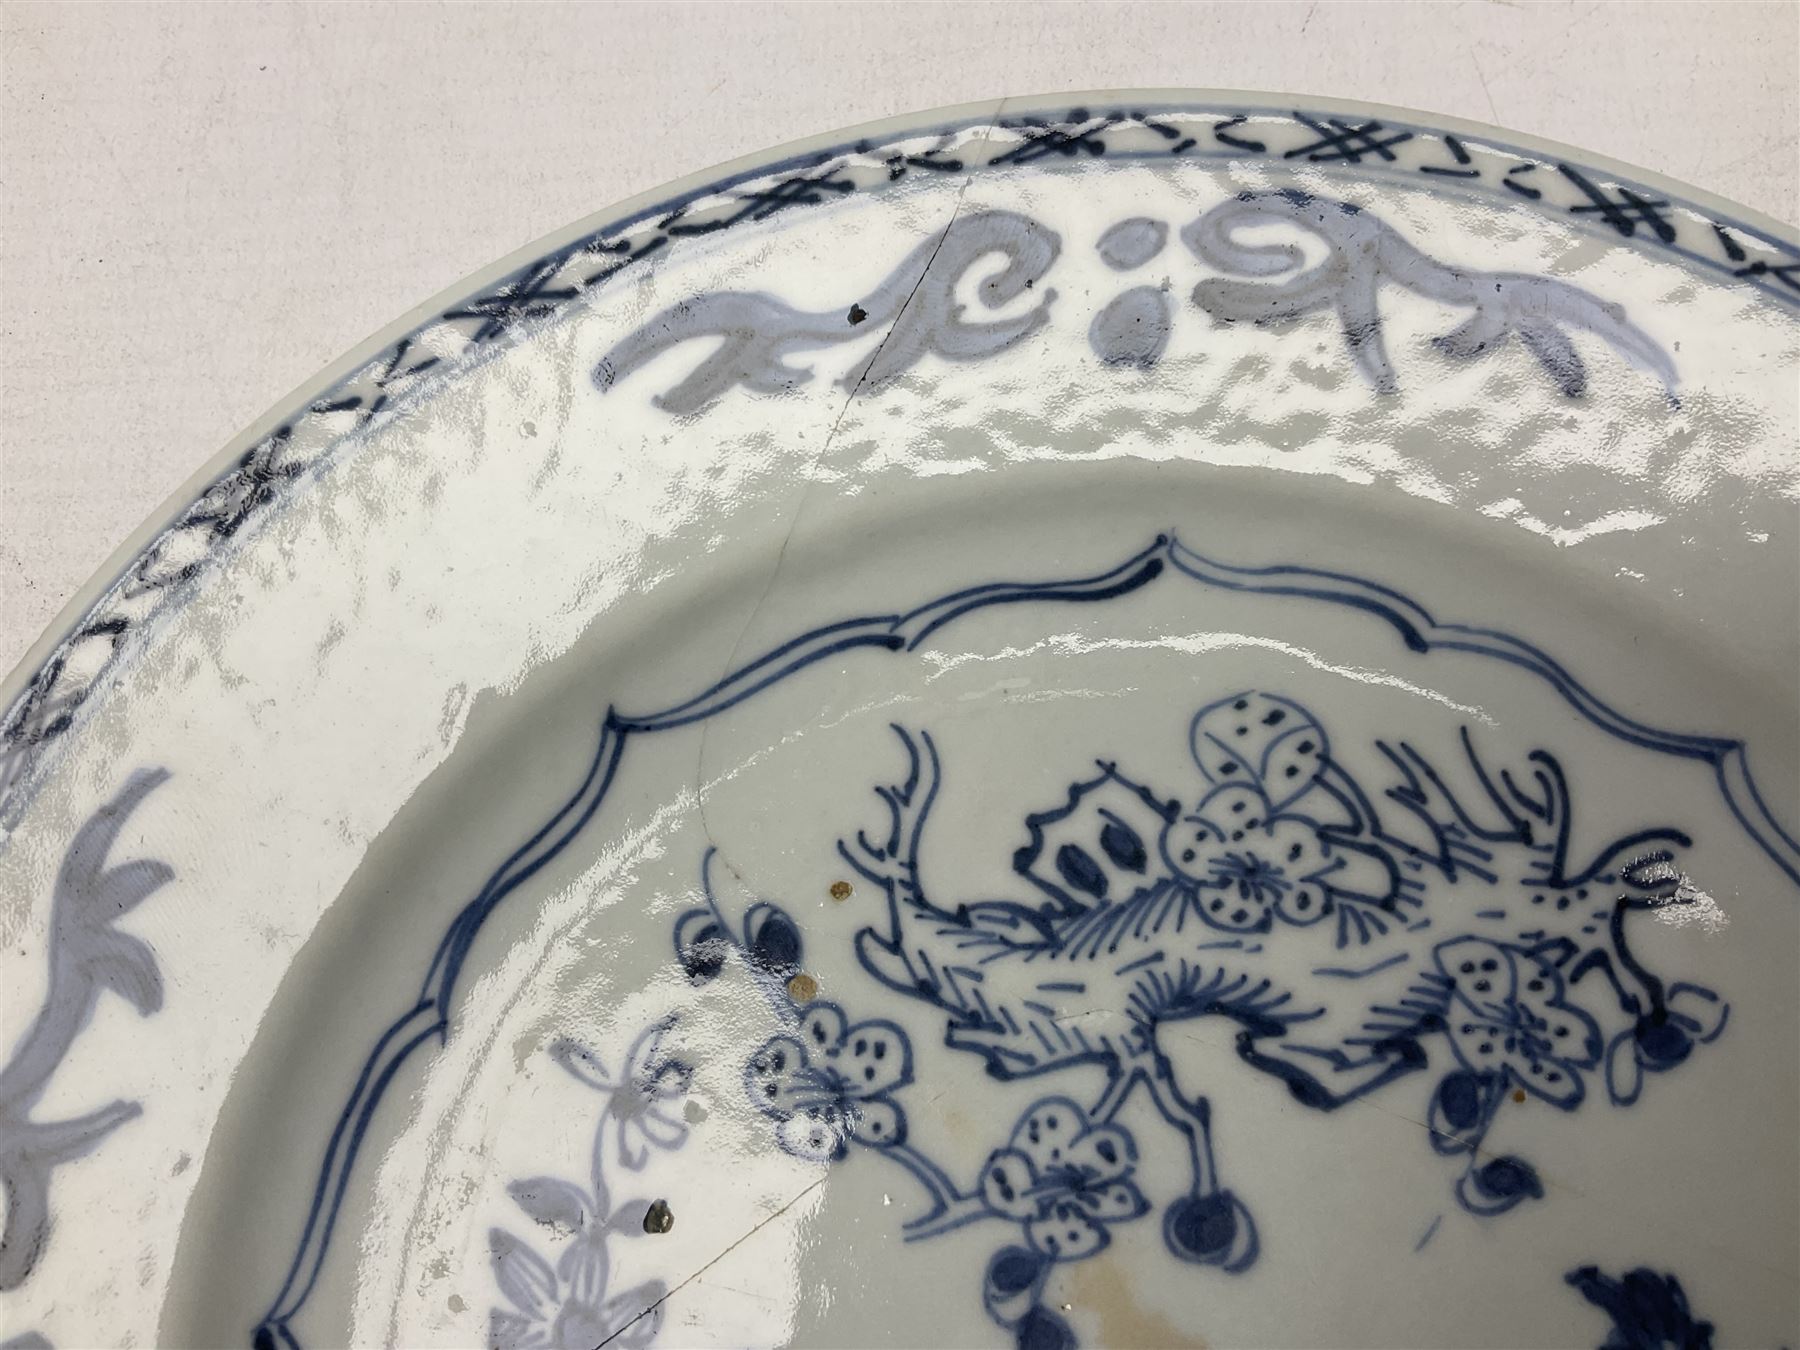 Set of four 18th century Chinese export blue and white porcelain plates with painted foliate decorat - Image 12 of 14